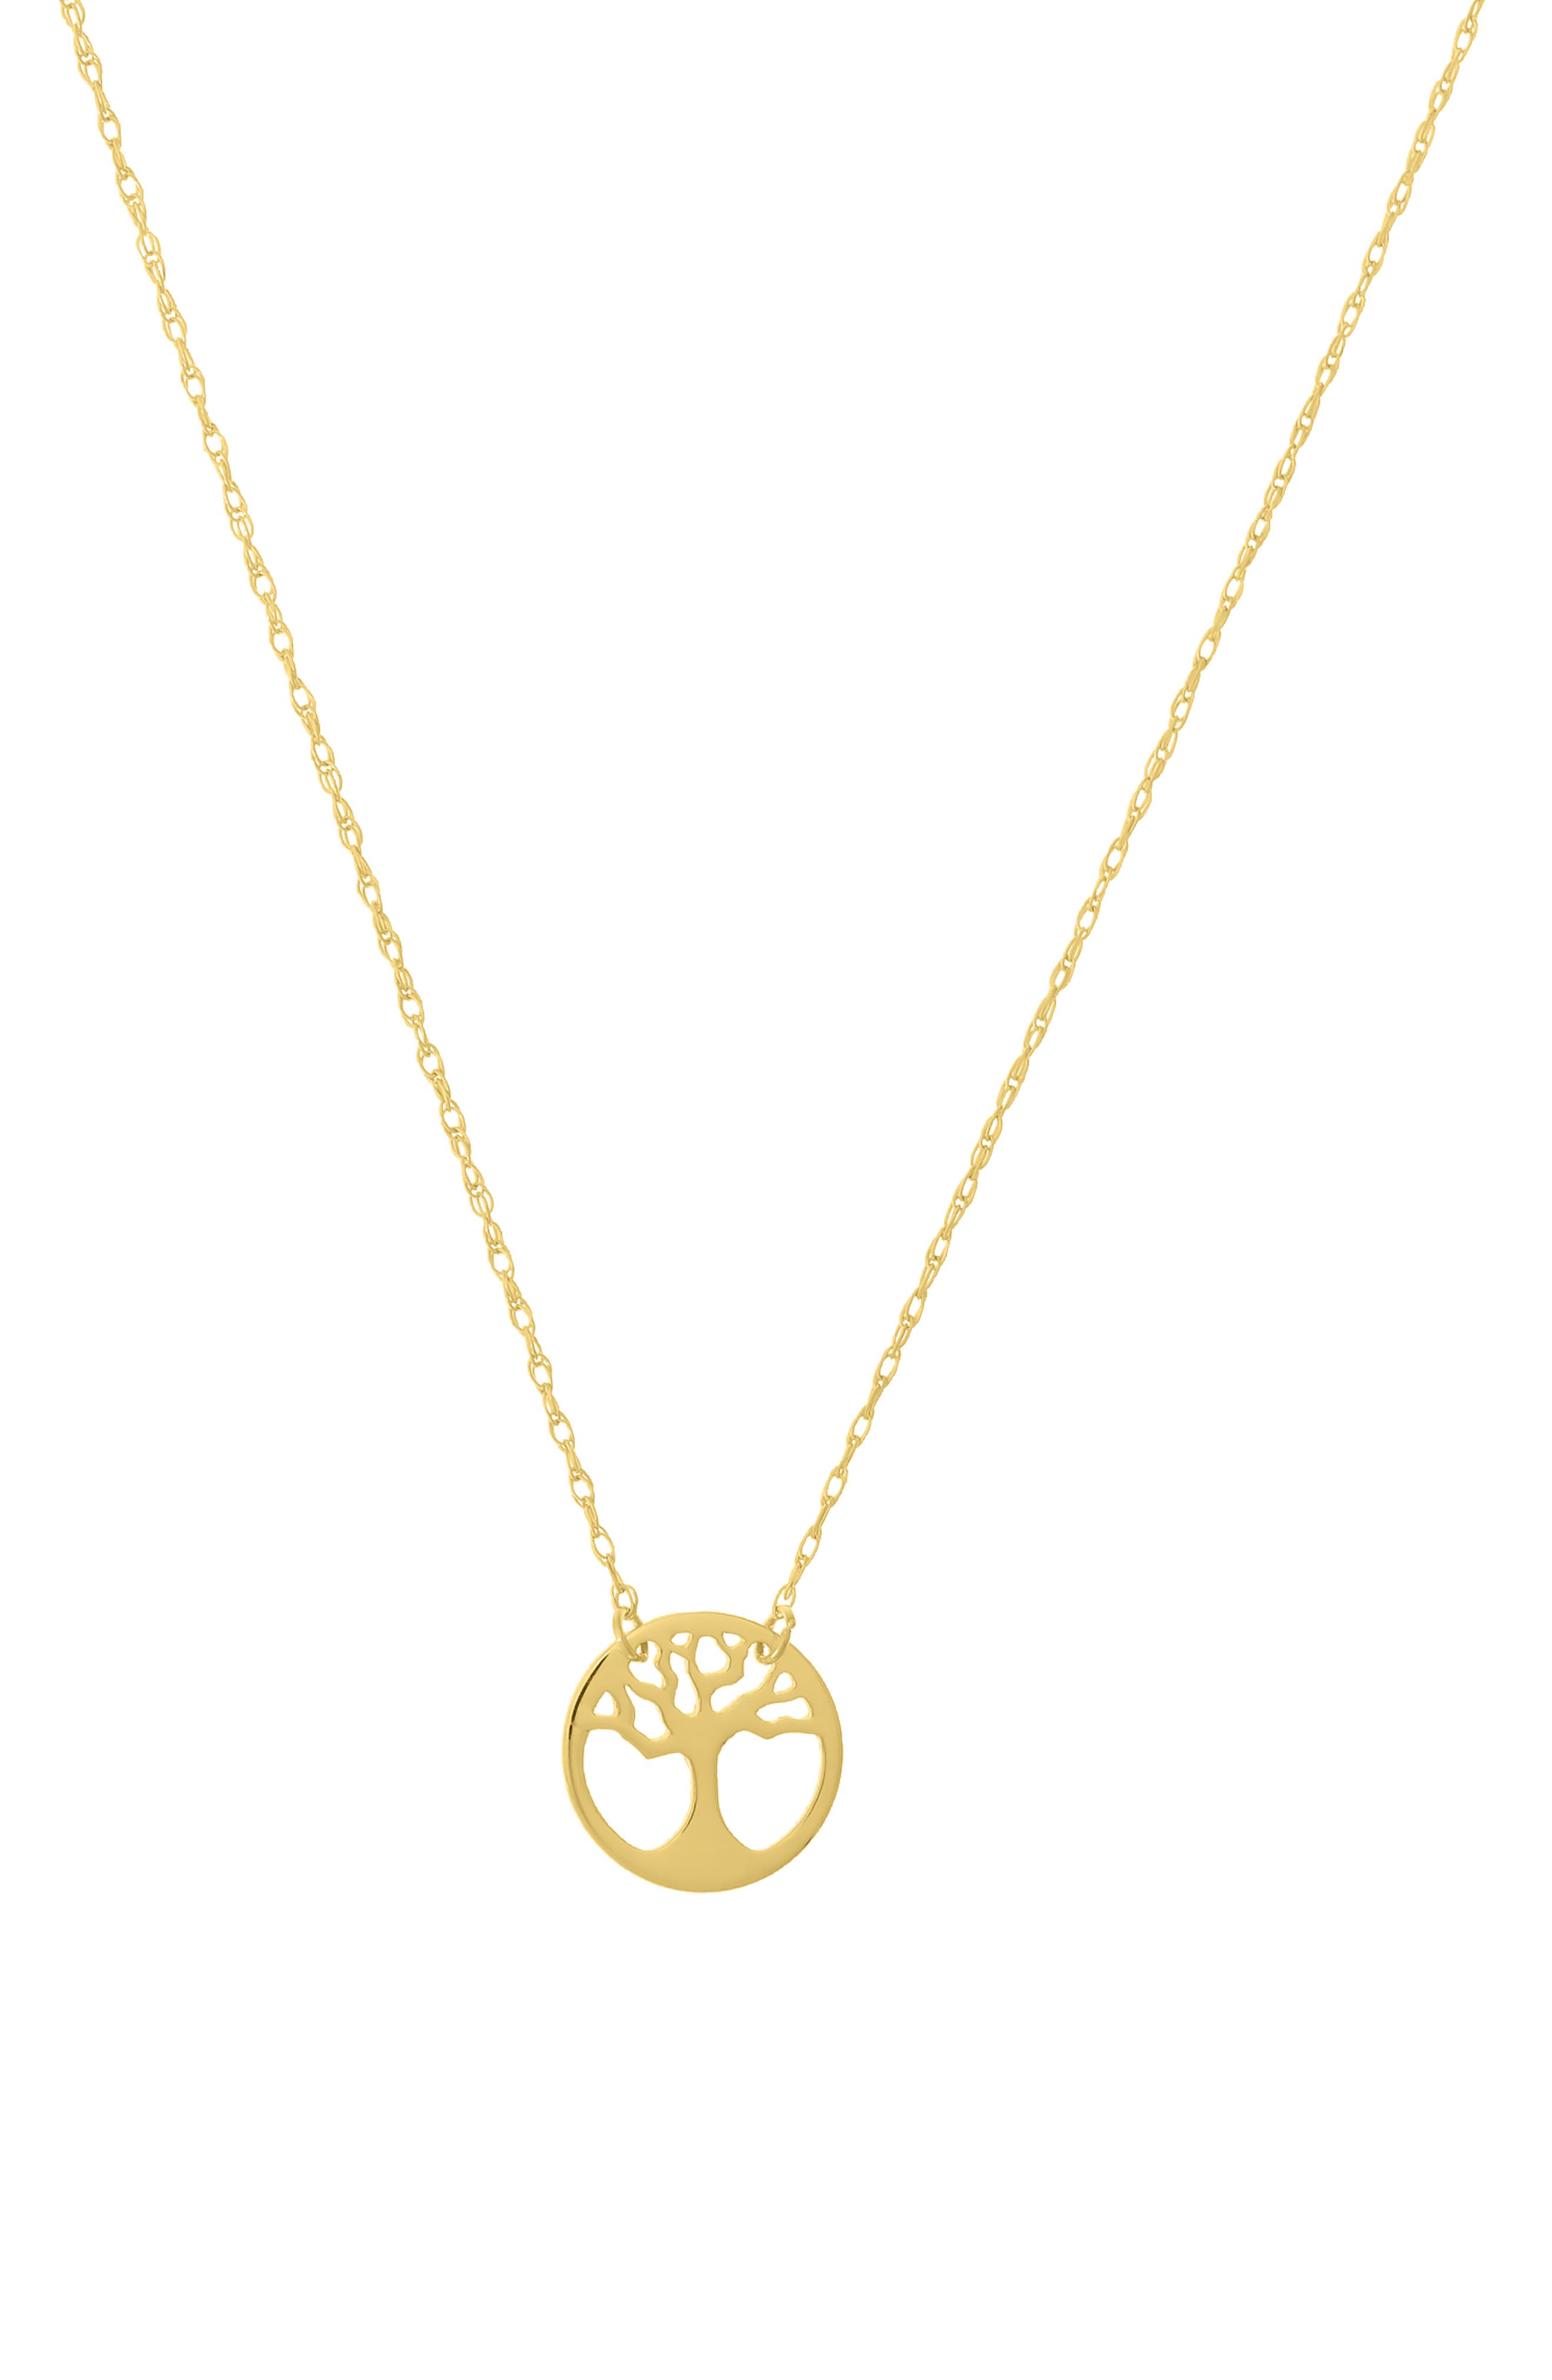 Suzy Levian - 14K 5 Clover The Yard Station Necklace Chinese Contemporary Diamond Rose Gold